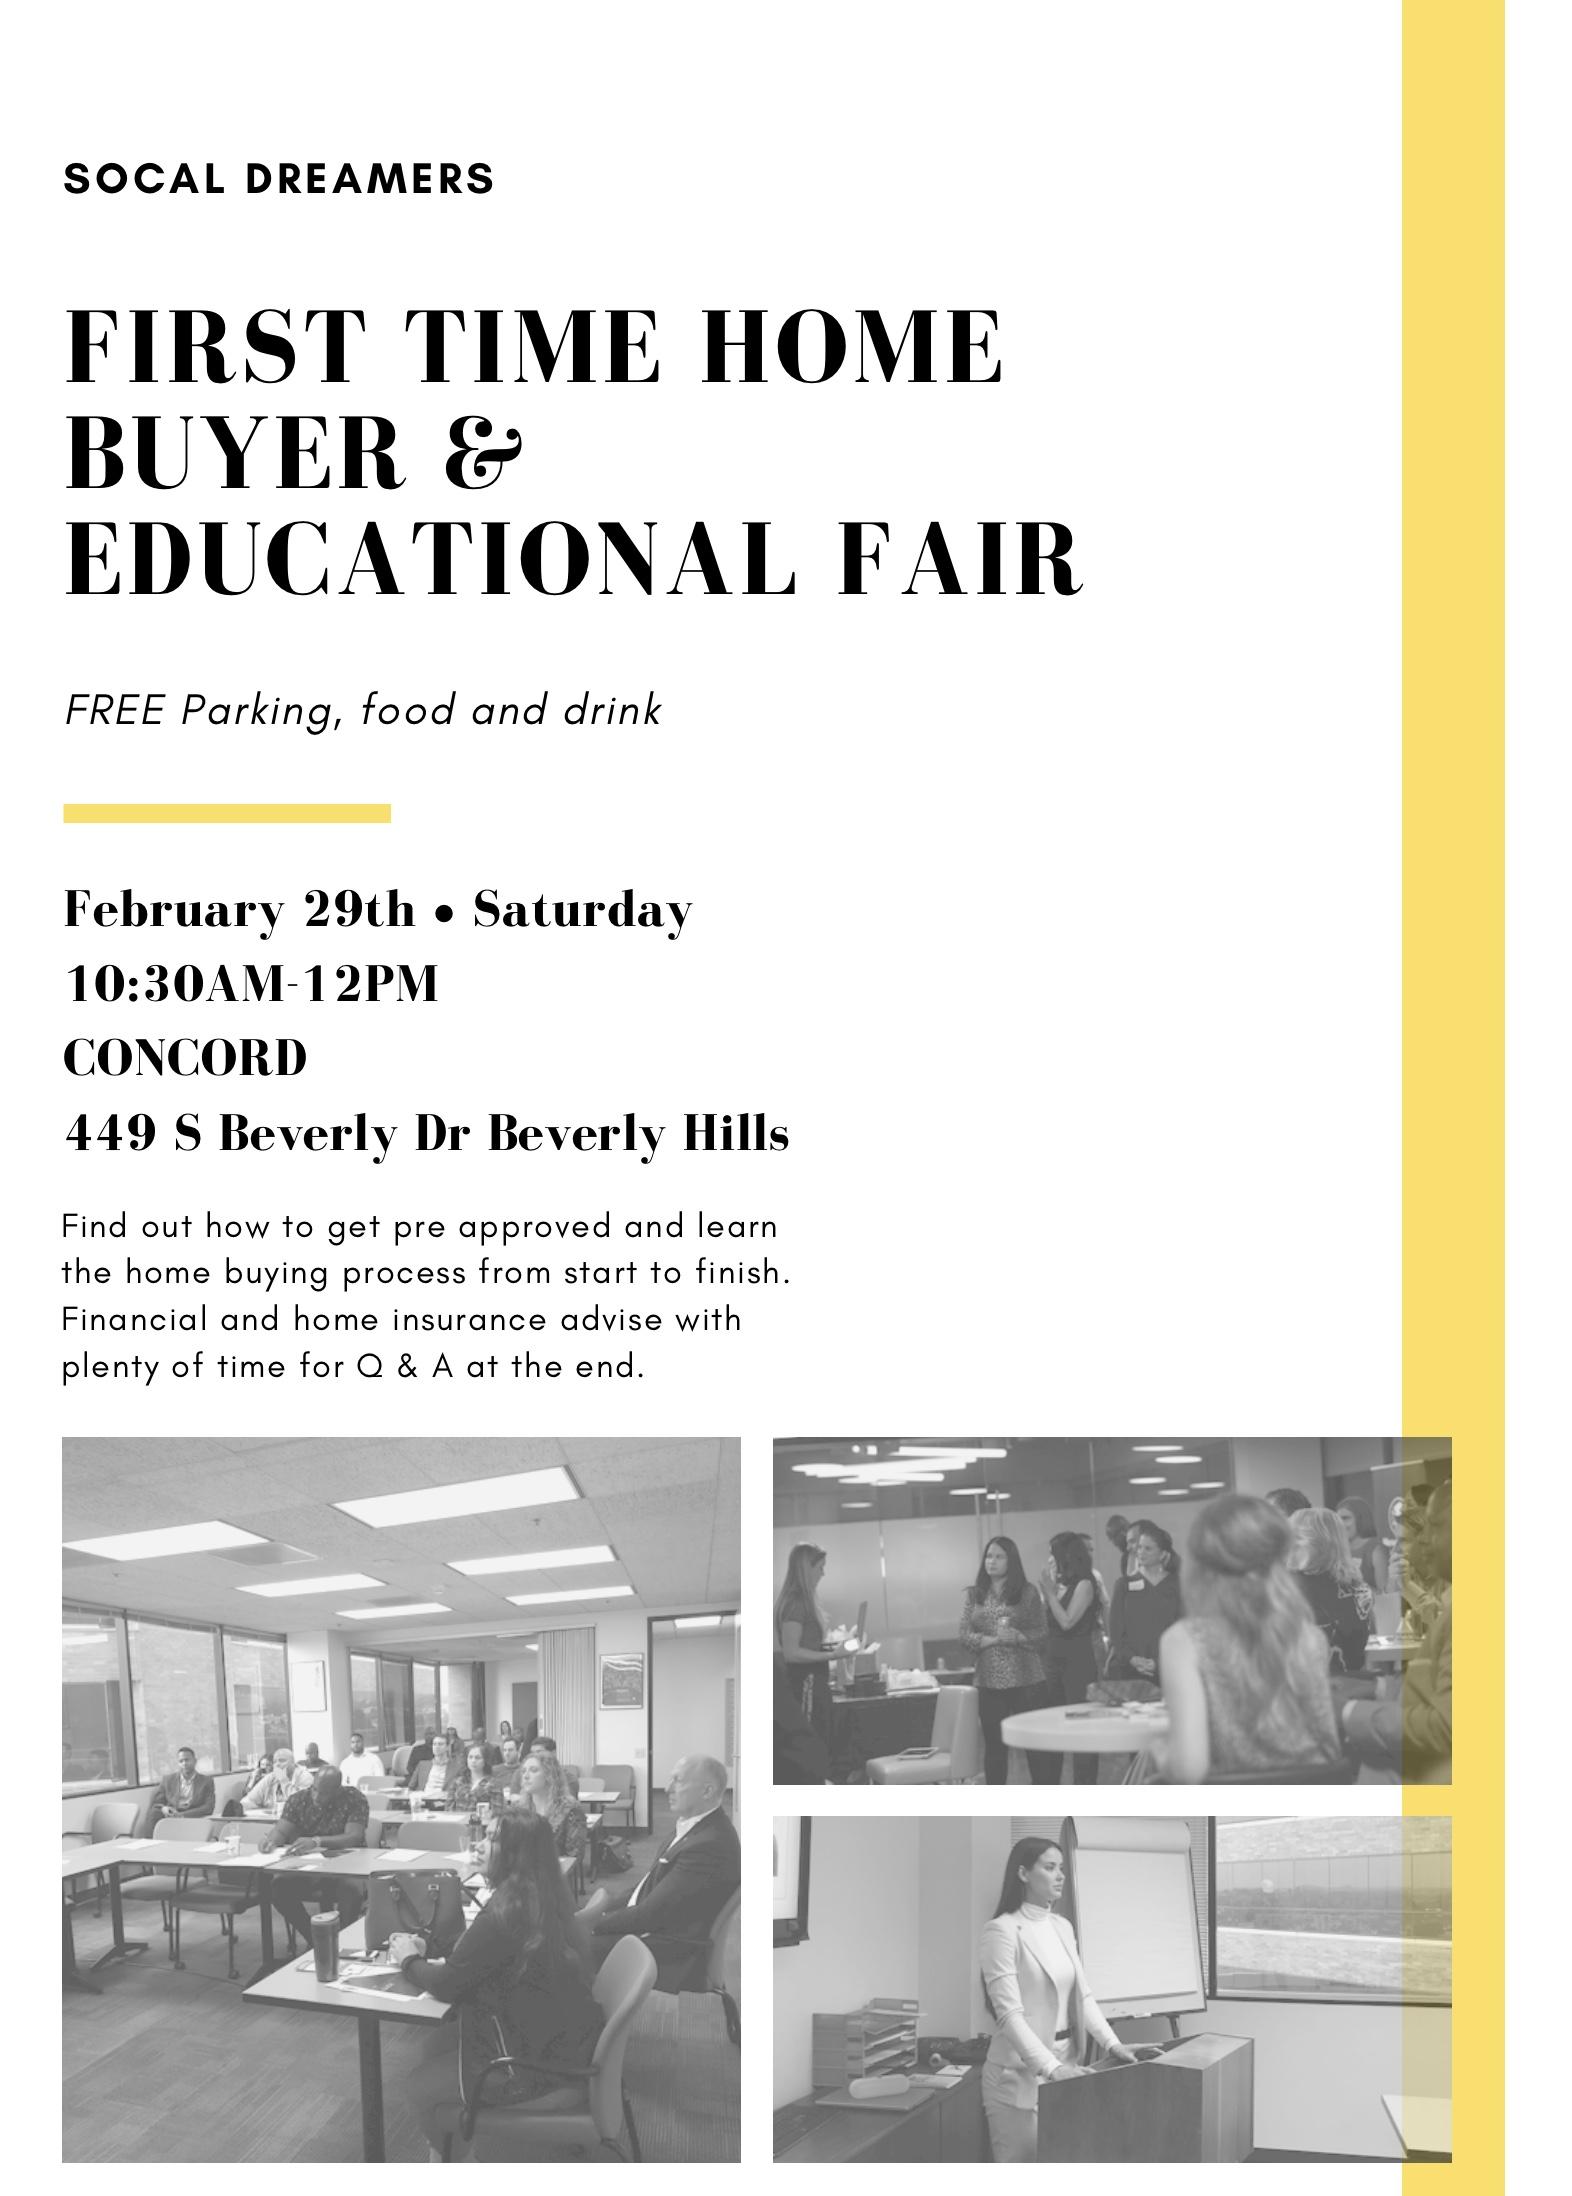 FIRST TIME HOME BUYER & EDUCATIONAL FAIR